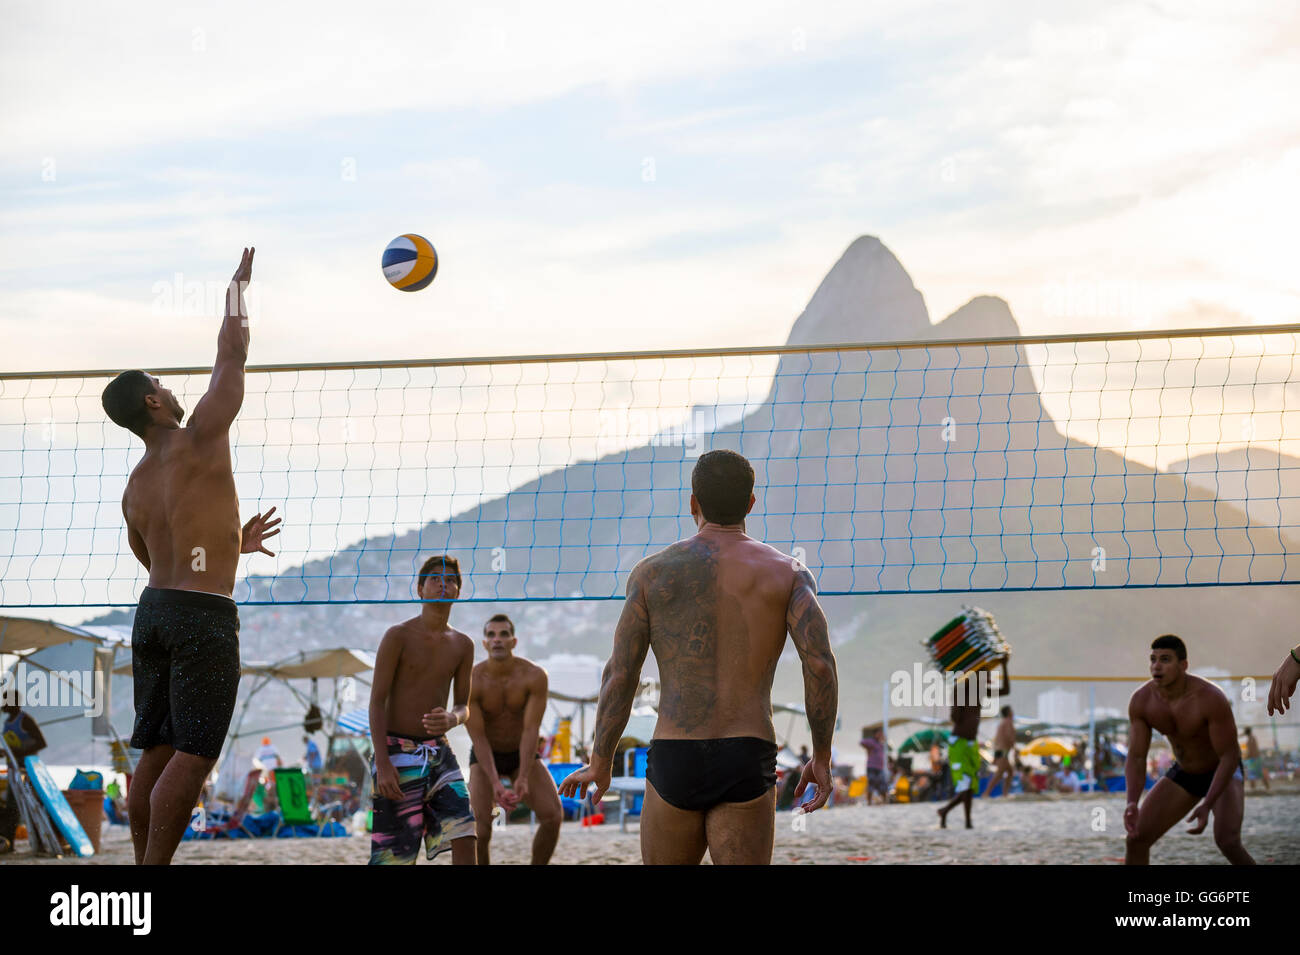 RIO DE JANEIRO - MARCH 20, 2016: Young carioca Brazilians play beach volleyball, a sport Brazil is favored to win in the Games. Stock Photo